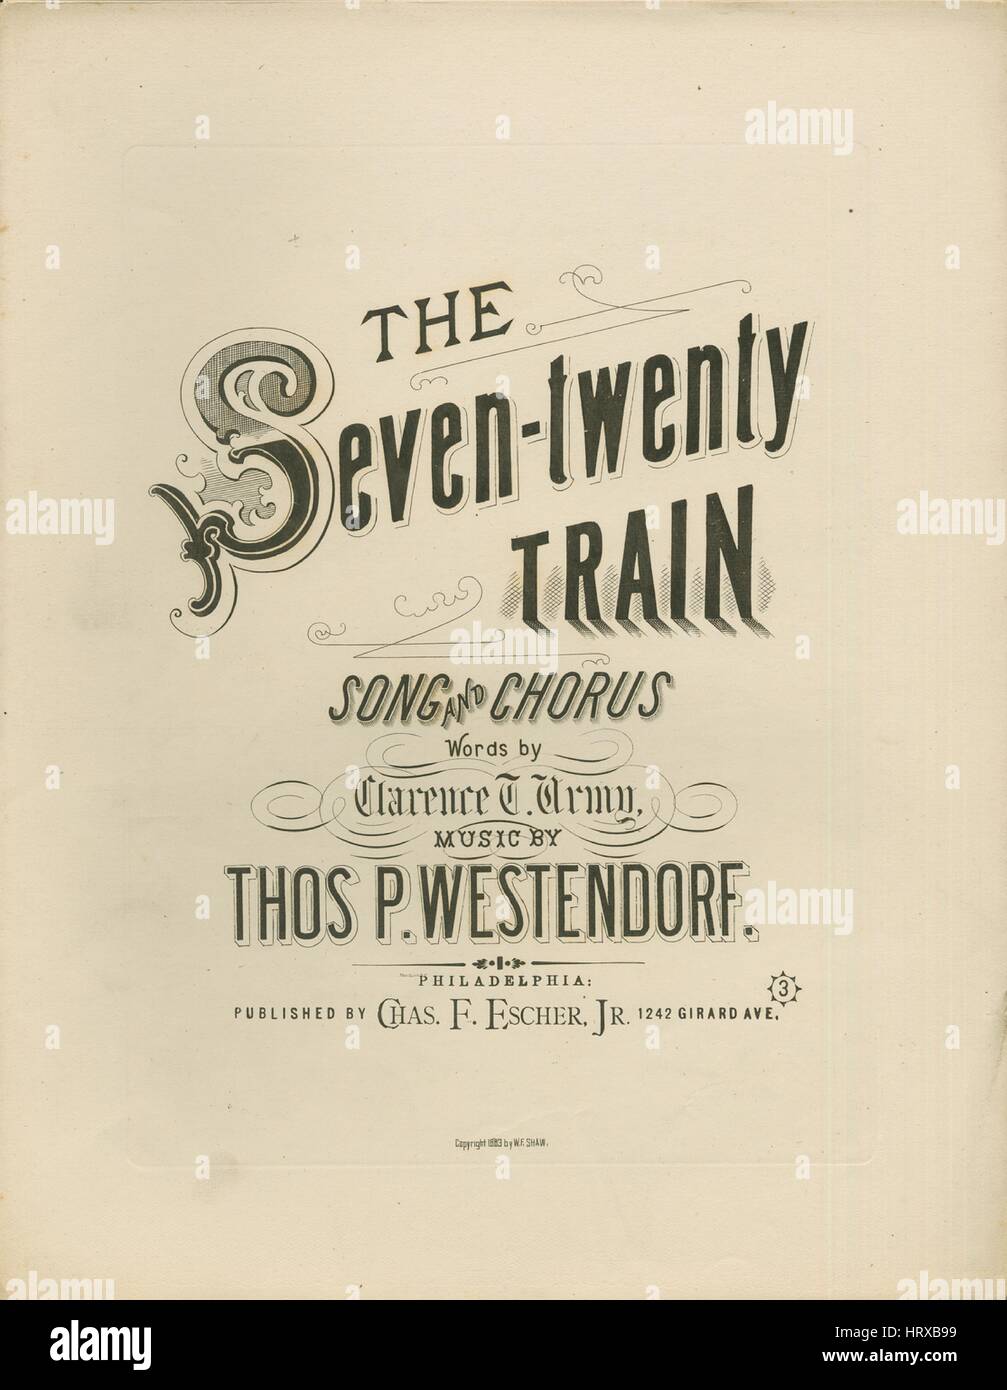 Sheet music cover image of the song 'The Seven-twenty Train Song and Chorus', with original authorship notes reading 'Words by Clarence T Army Music by Thos P Westendorf', United States, 1883. The publisher is listed as 'Chas. F. Escher, Jr., 1242 Girard Ave.', the form of composition is 'strophic with chorus', the instrumentation is 'piano and voice (solo and satb chorus)', the first line reads 'I'm engineer on number five, I run from Down to Derry', and the illustration artist is listed as 'None'. Stock Photo